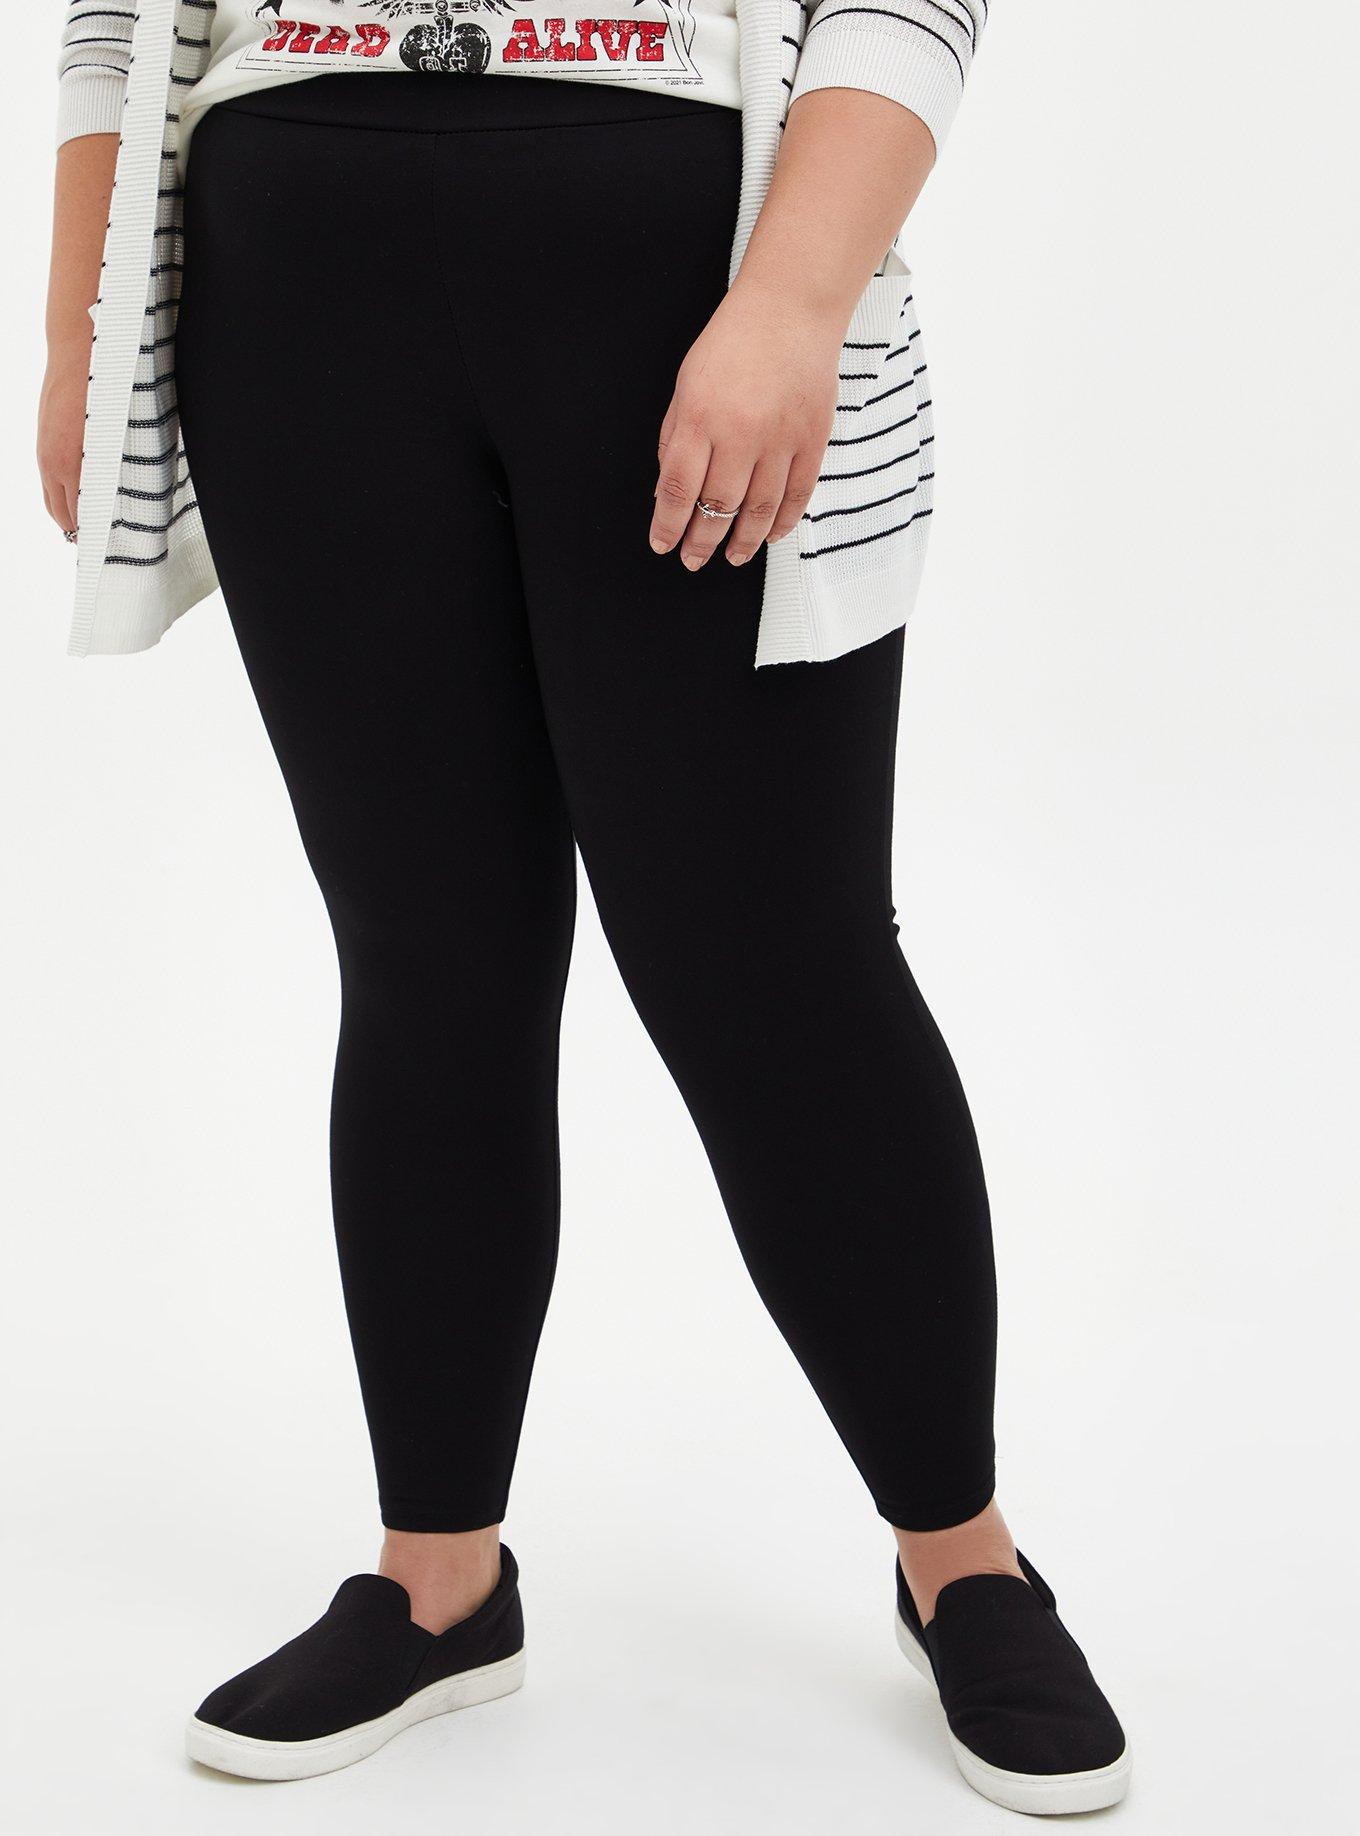 Women's Plus Size High-Waisted Ponte Leggings - A New Day Black 4X